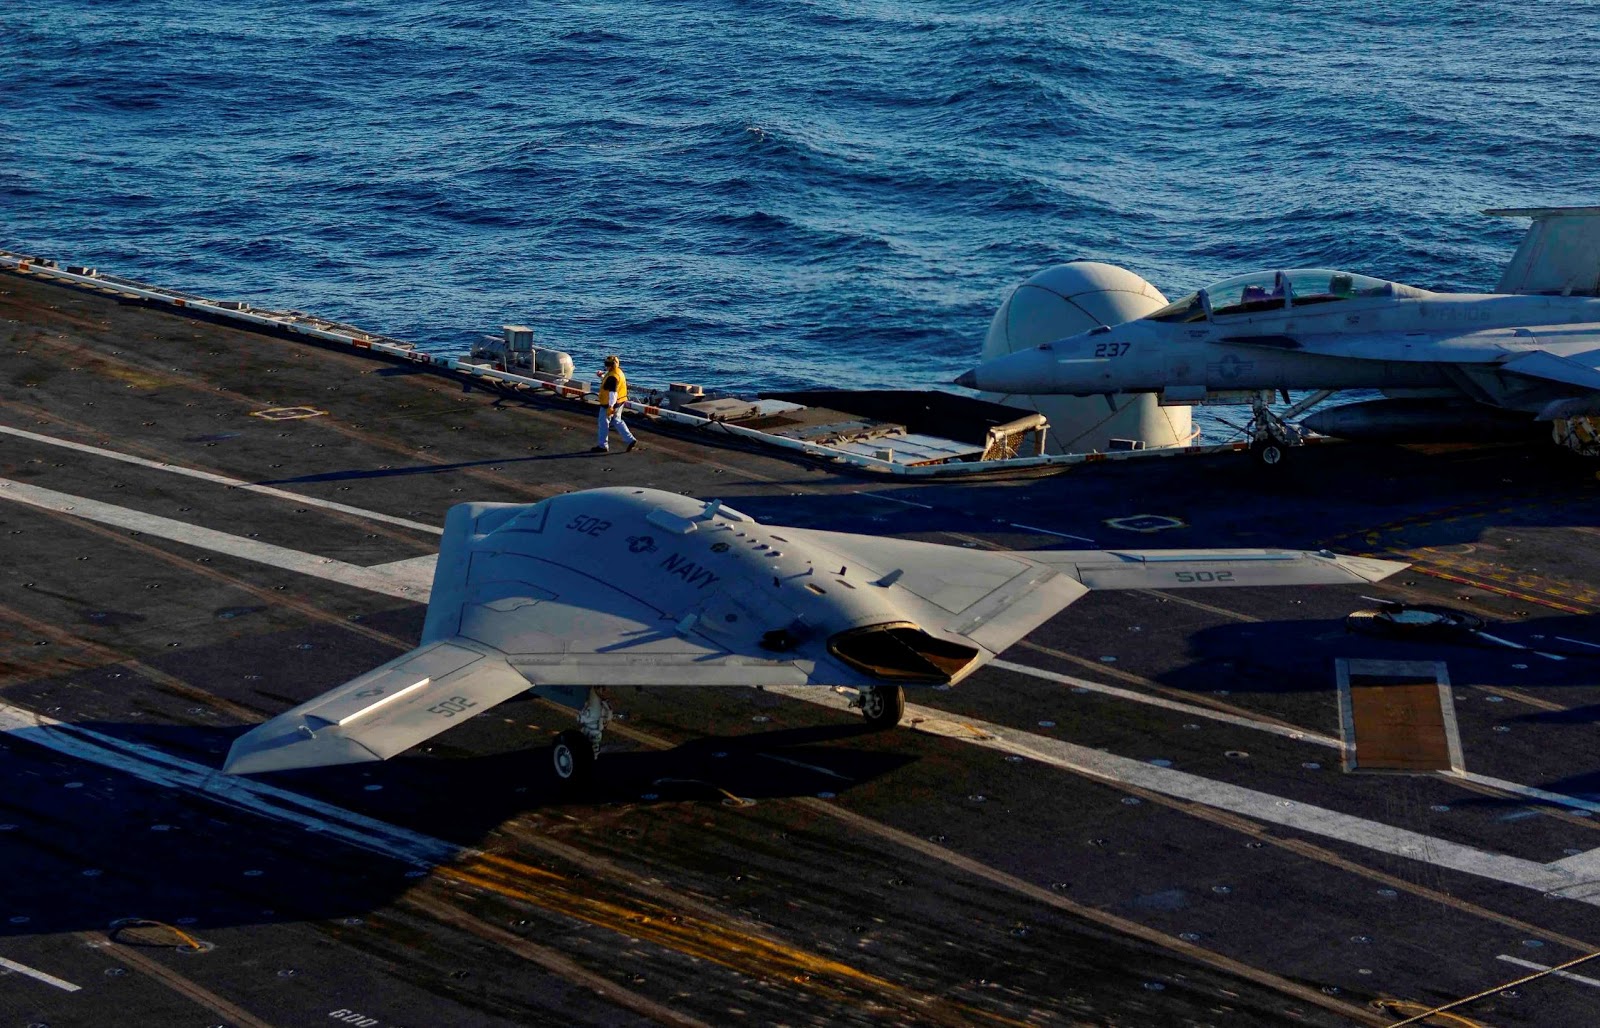 Northrop+Grumman+X-47B+Unmanned+Combat+Air+System+(UCAS)+demonstrator+taxies+on+the+flight+deck+of+the+aircraft+carrier+USS+Harry+S.+Truman+(CVN+75).+Harry+S.+Truman+aircraft+carrier+host+test+operations+for+an+unmanned+airc+(4).jpg